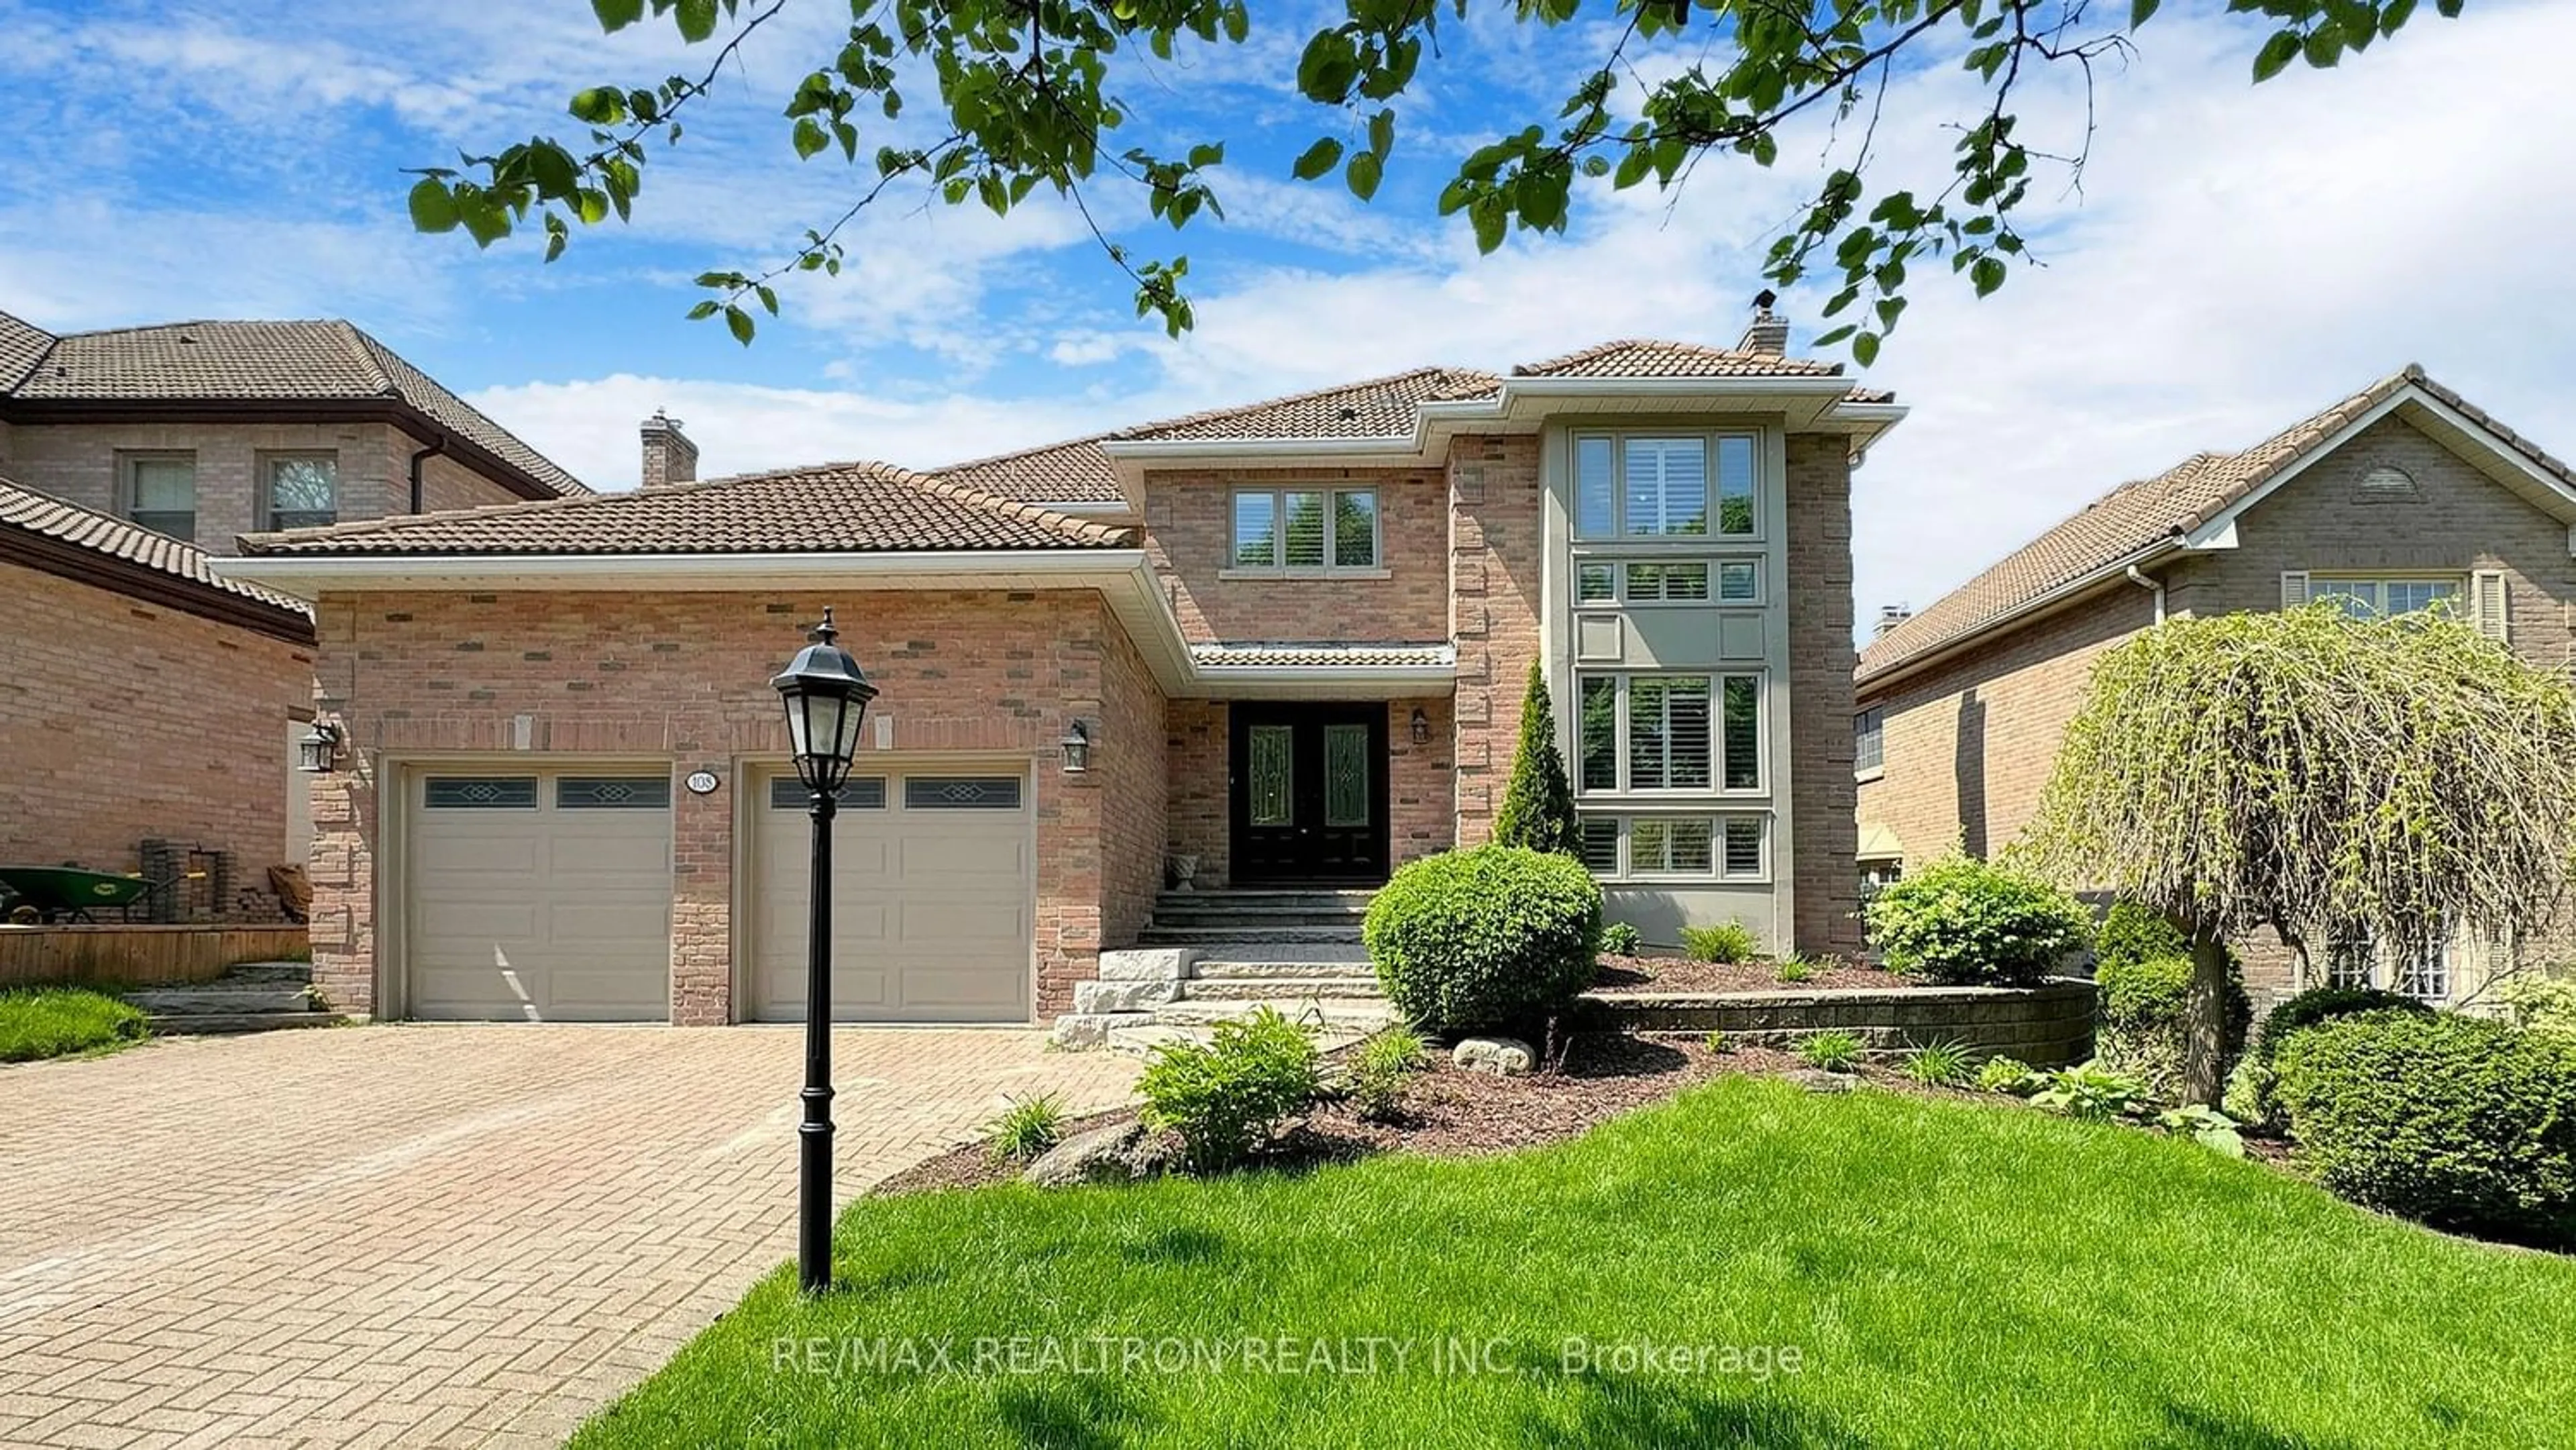 Home with brick exterior material for 108 Cranberry Lane, Aurora Ontario L4G 5Z3